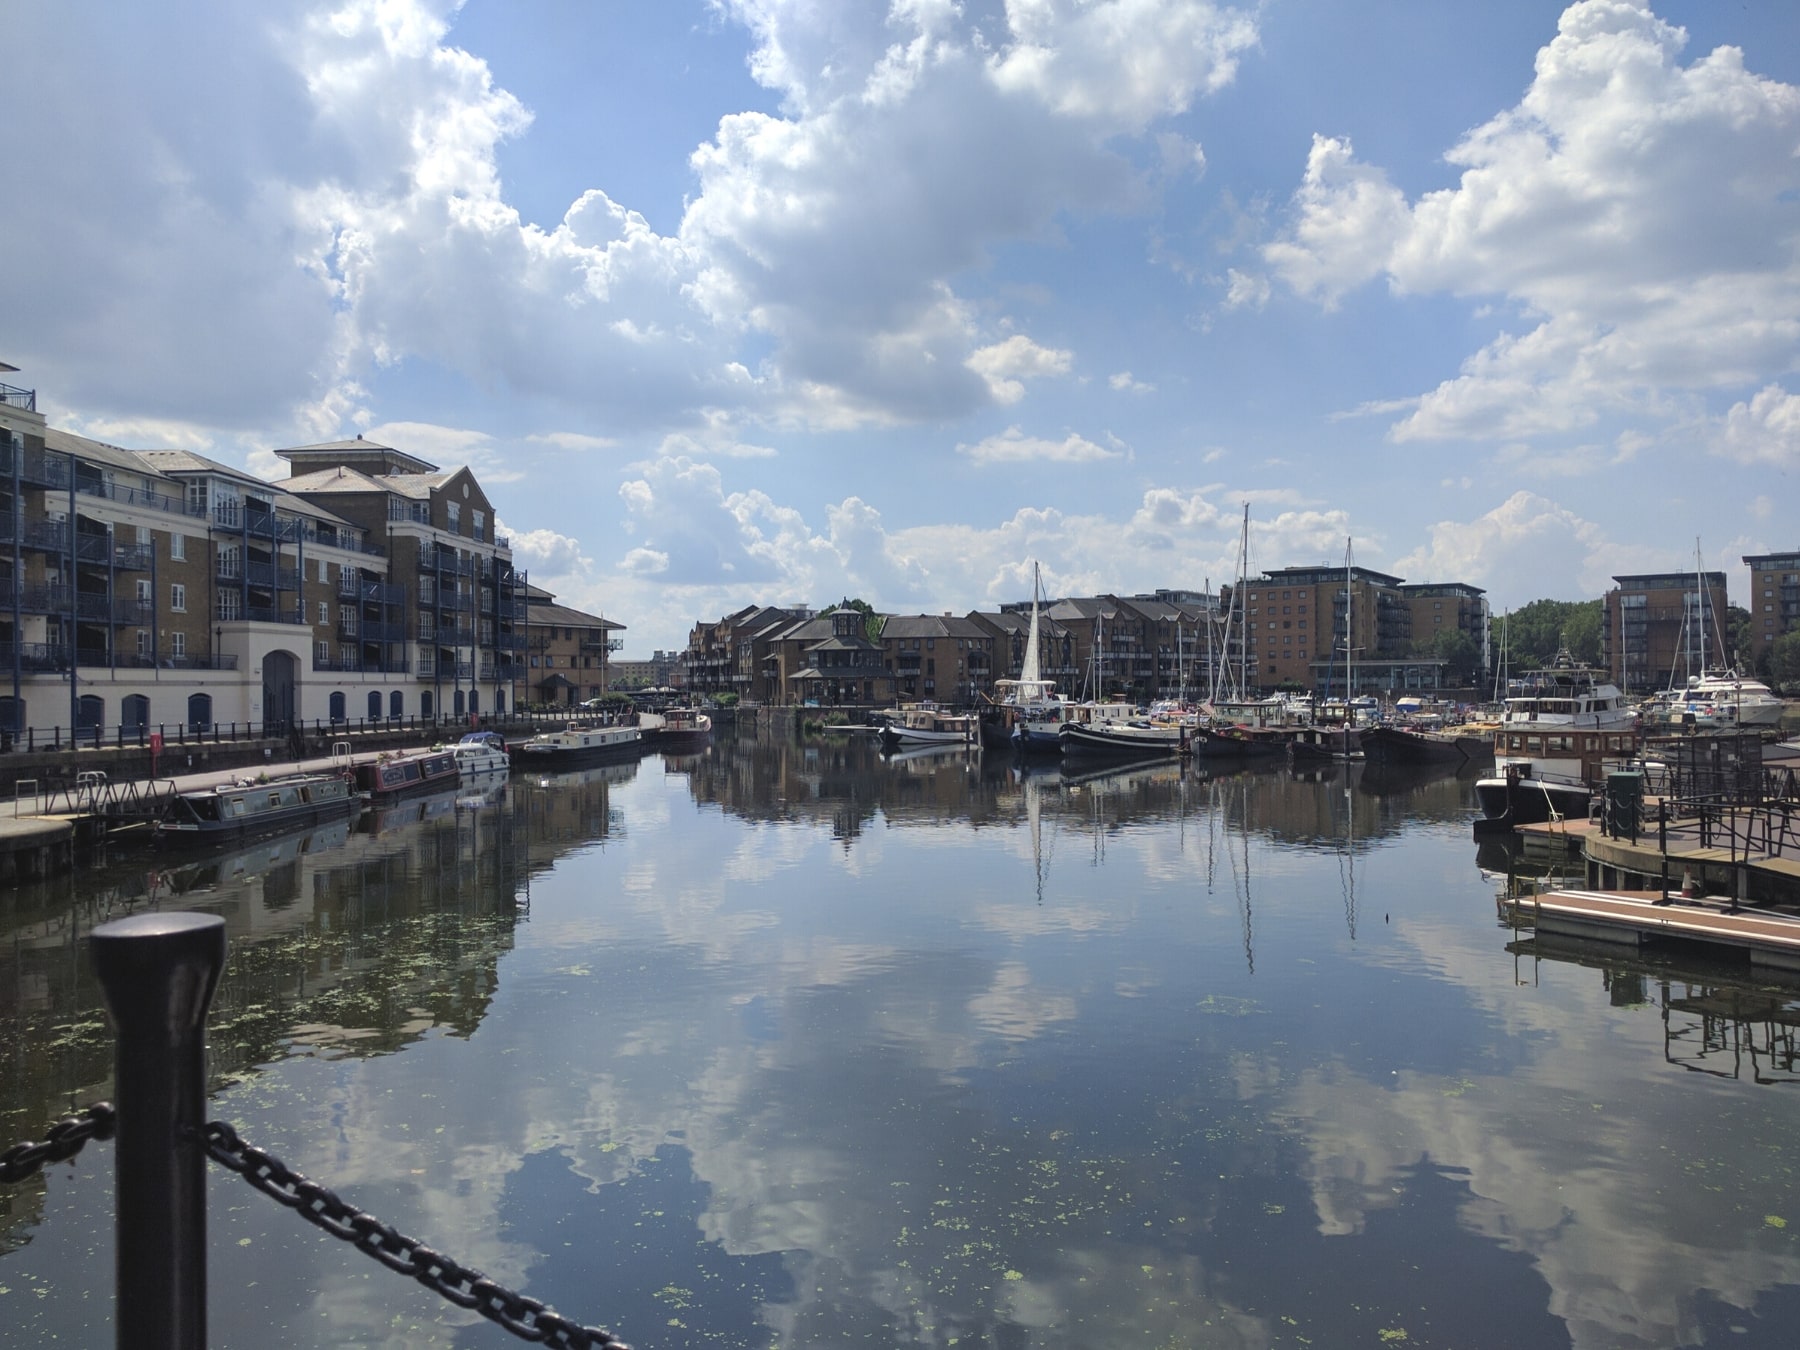 Tottenham Hale to Limehouse Basin walking along the Lee Valley